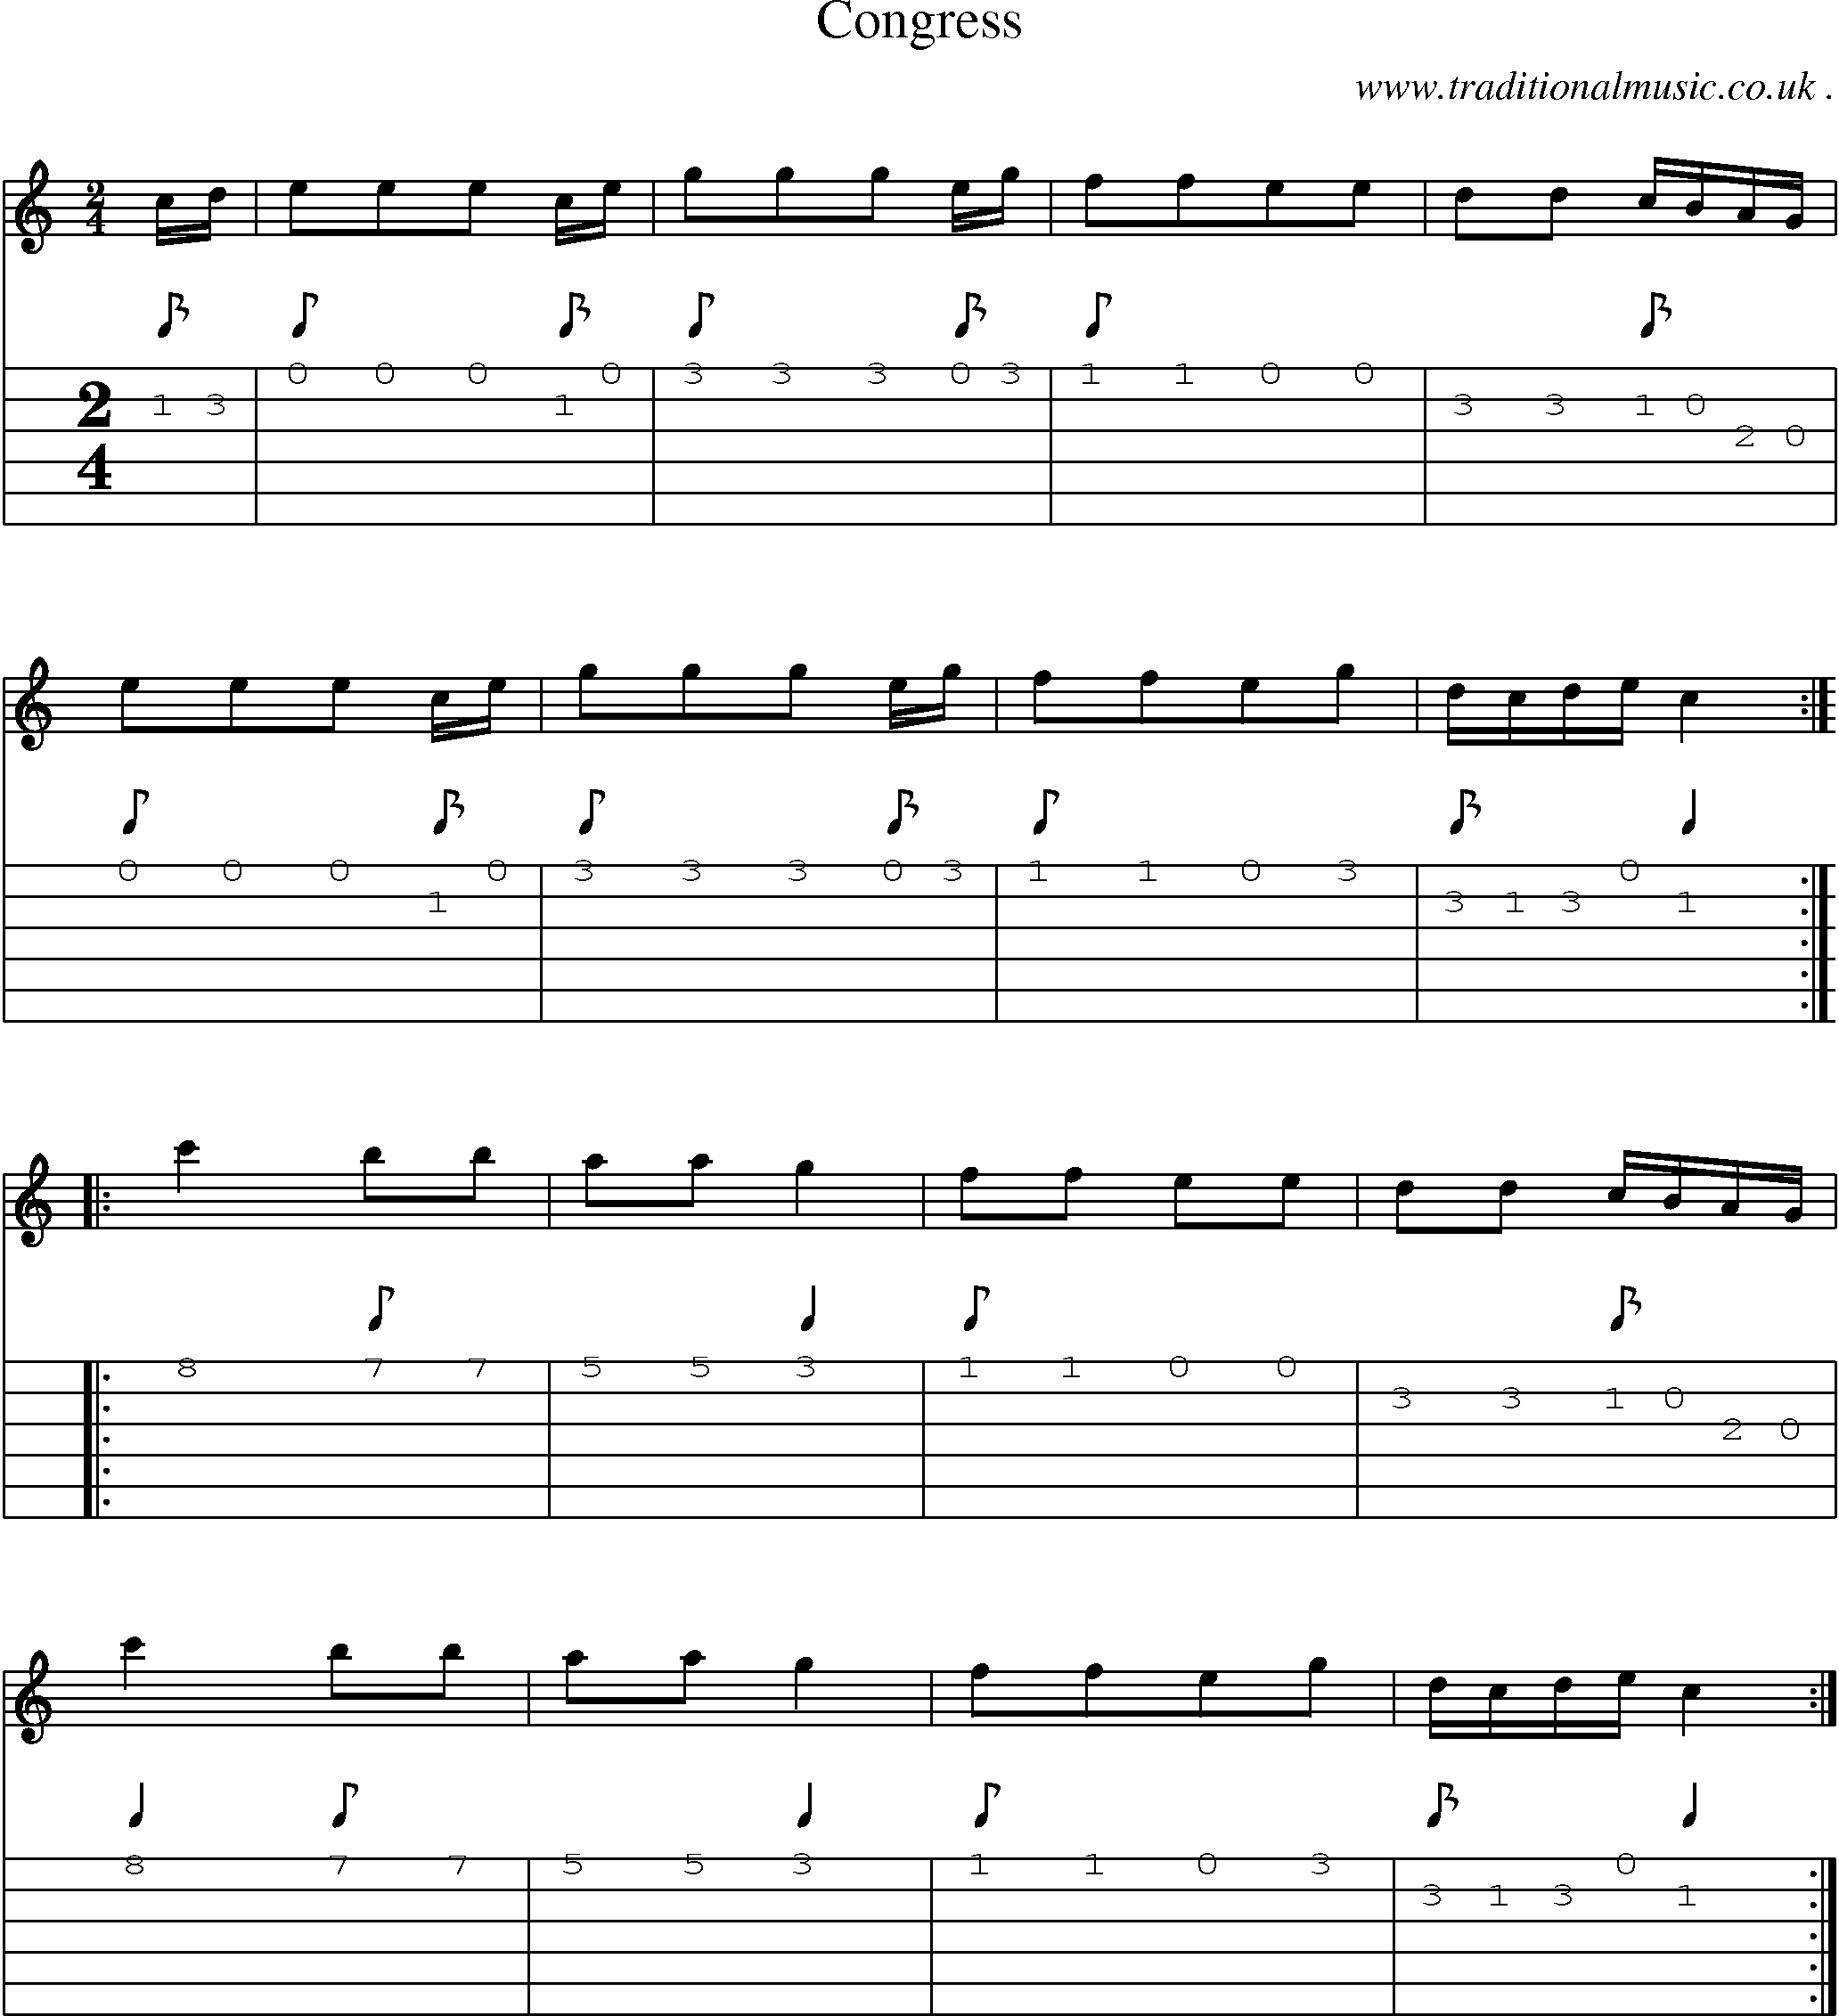 Sheet-Music and Guitar Tabs for Congress